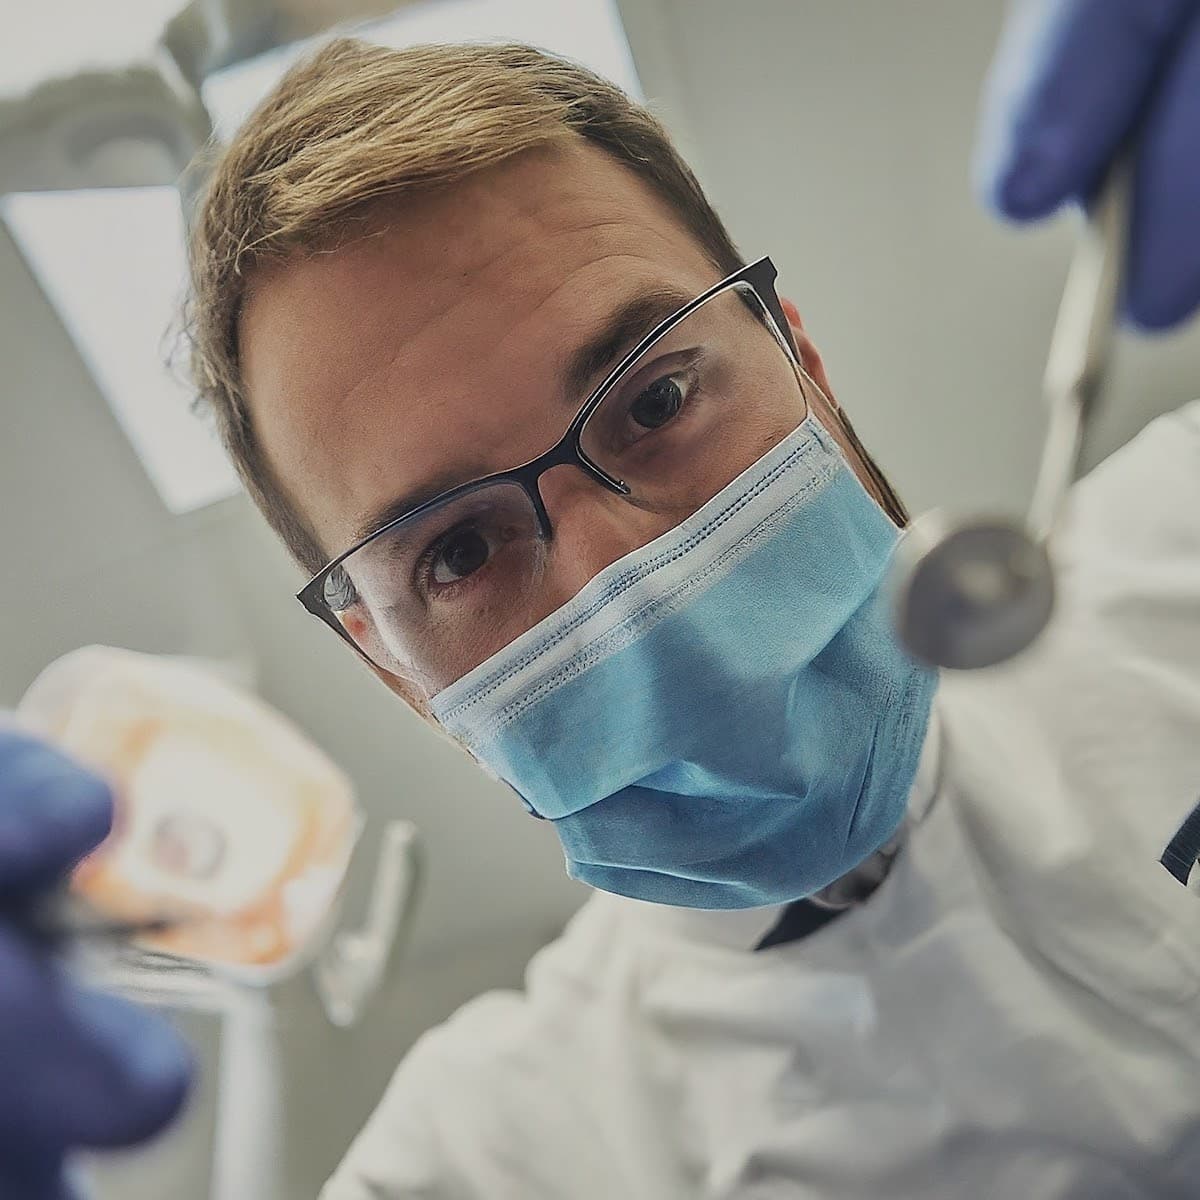 Image of a dentist from the patient's perspective